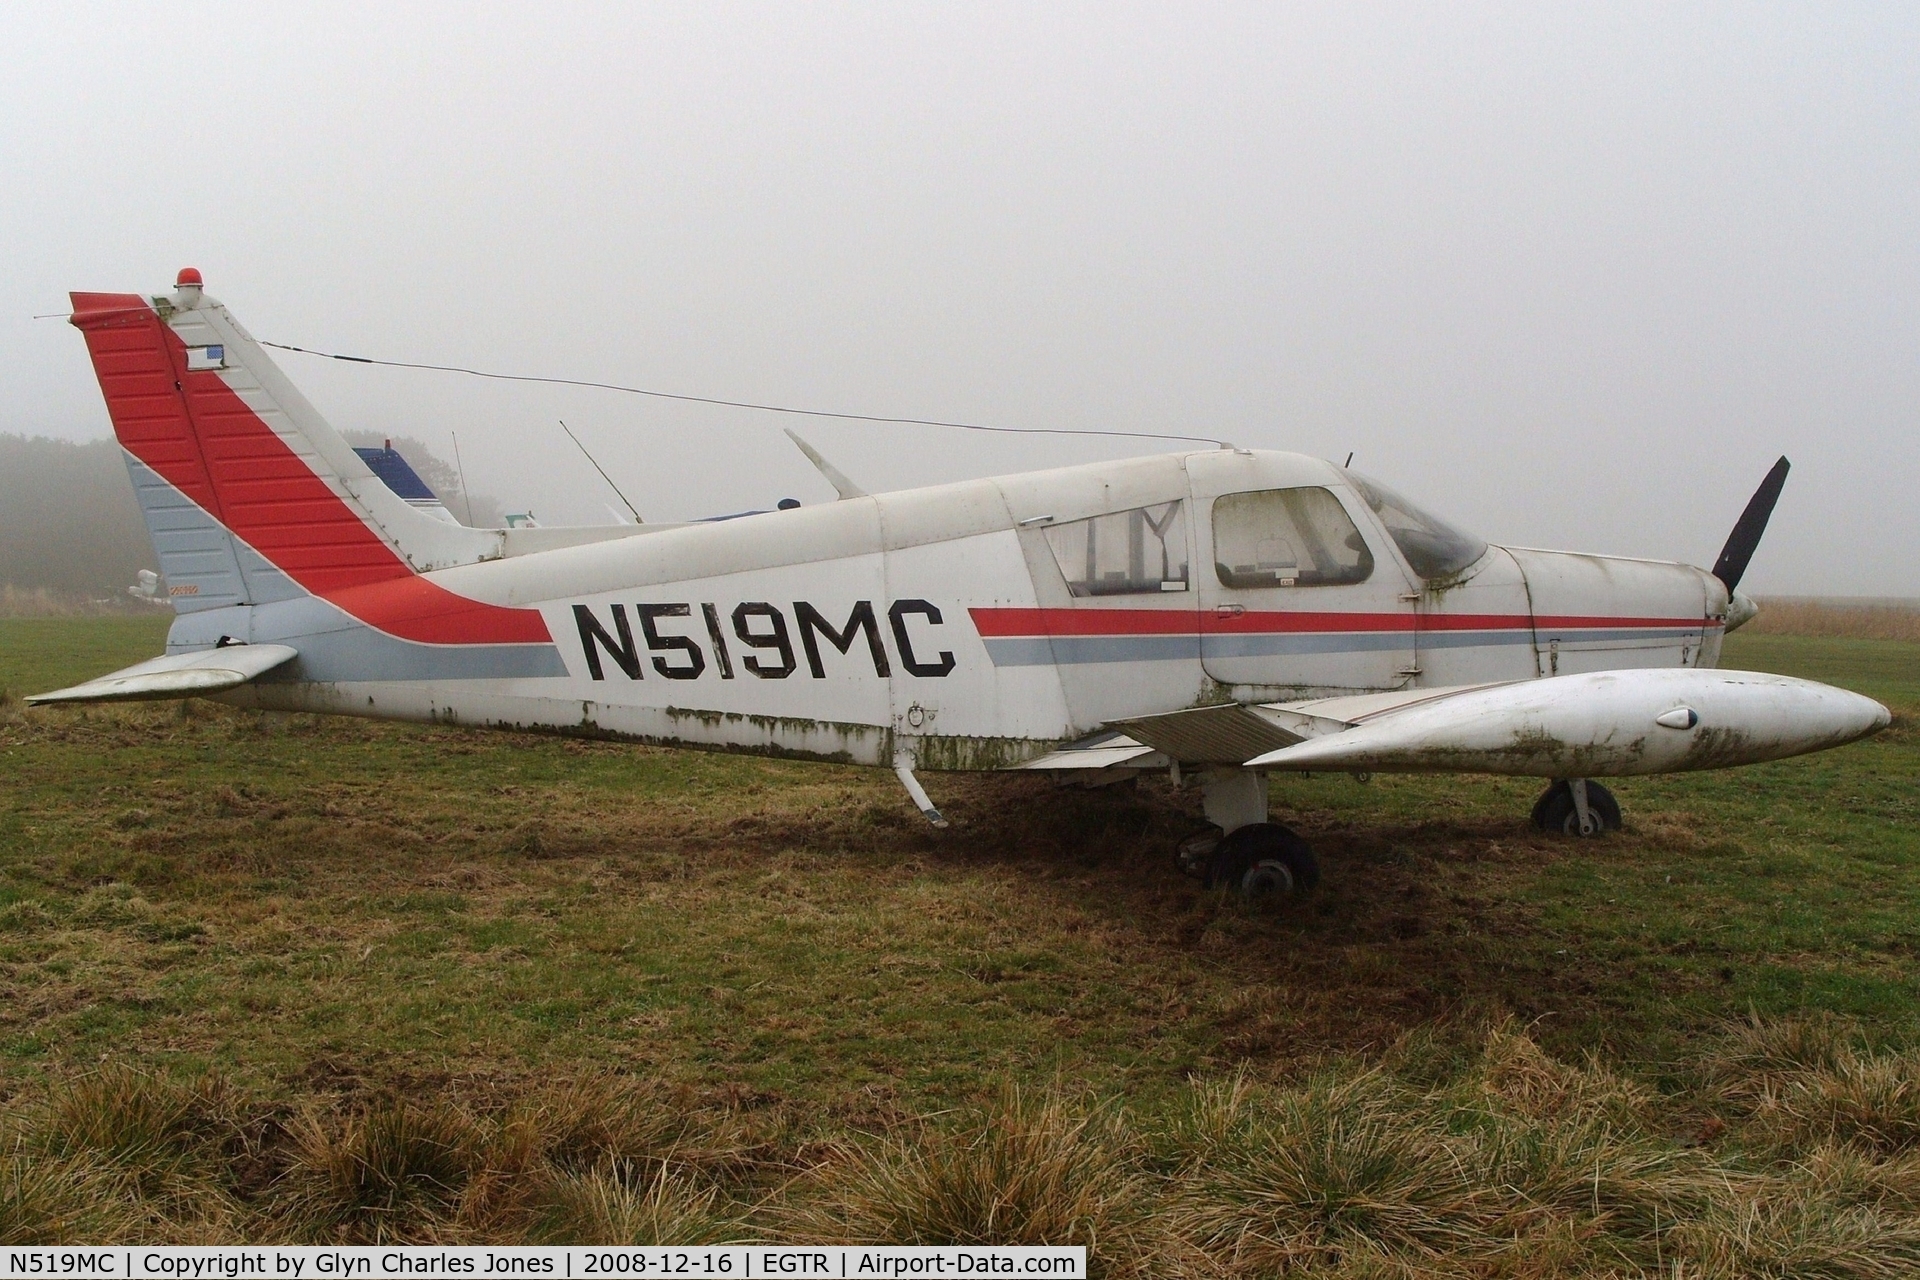 N519MC, 1973 Piper PA-28-140 Cherokee F C/N 28-7325519, Taken on a quiet cold and foggy day. With thanks to Elstree control tower who granted me authority to take photographs on the aerodrome. Sadly looking rather shabby after being exposed to the elements for a long period of time. Piper PA-28-140 Cherokee F.